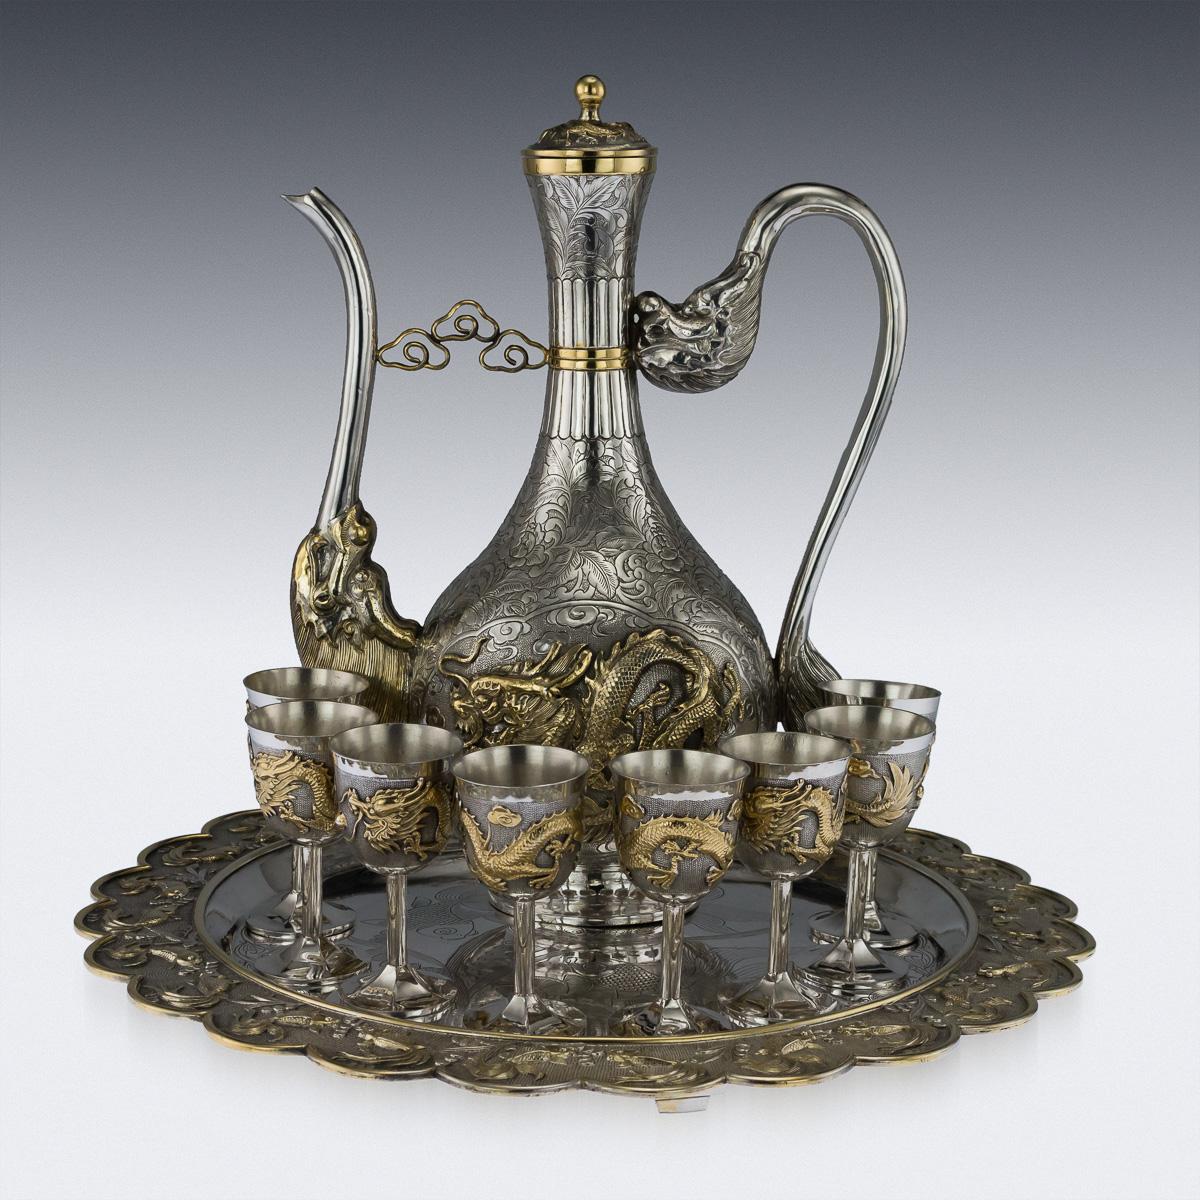 Exceptional mid-20th century Chinese solid silver-gilt sake drinking set, comprising of a large ewer, eight goblets and a large tray. Each piece is part-gilt and extremely decorative, ewer chased with scrolling foliage, flying dragons and mounted